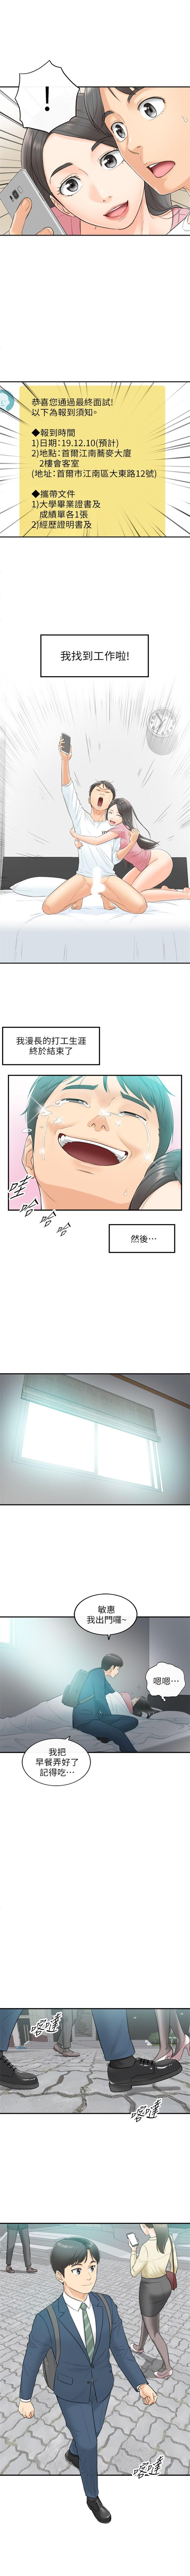 Chica 正妹小主管 1-54 官方中文（連載中） Spread - Page 8